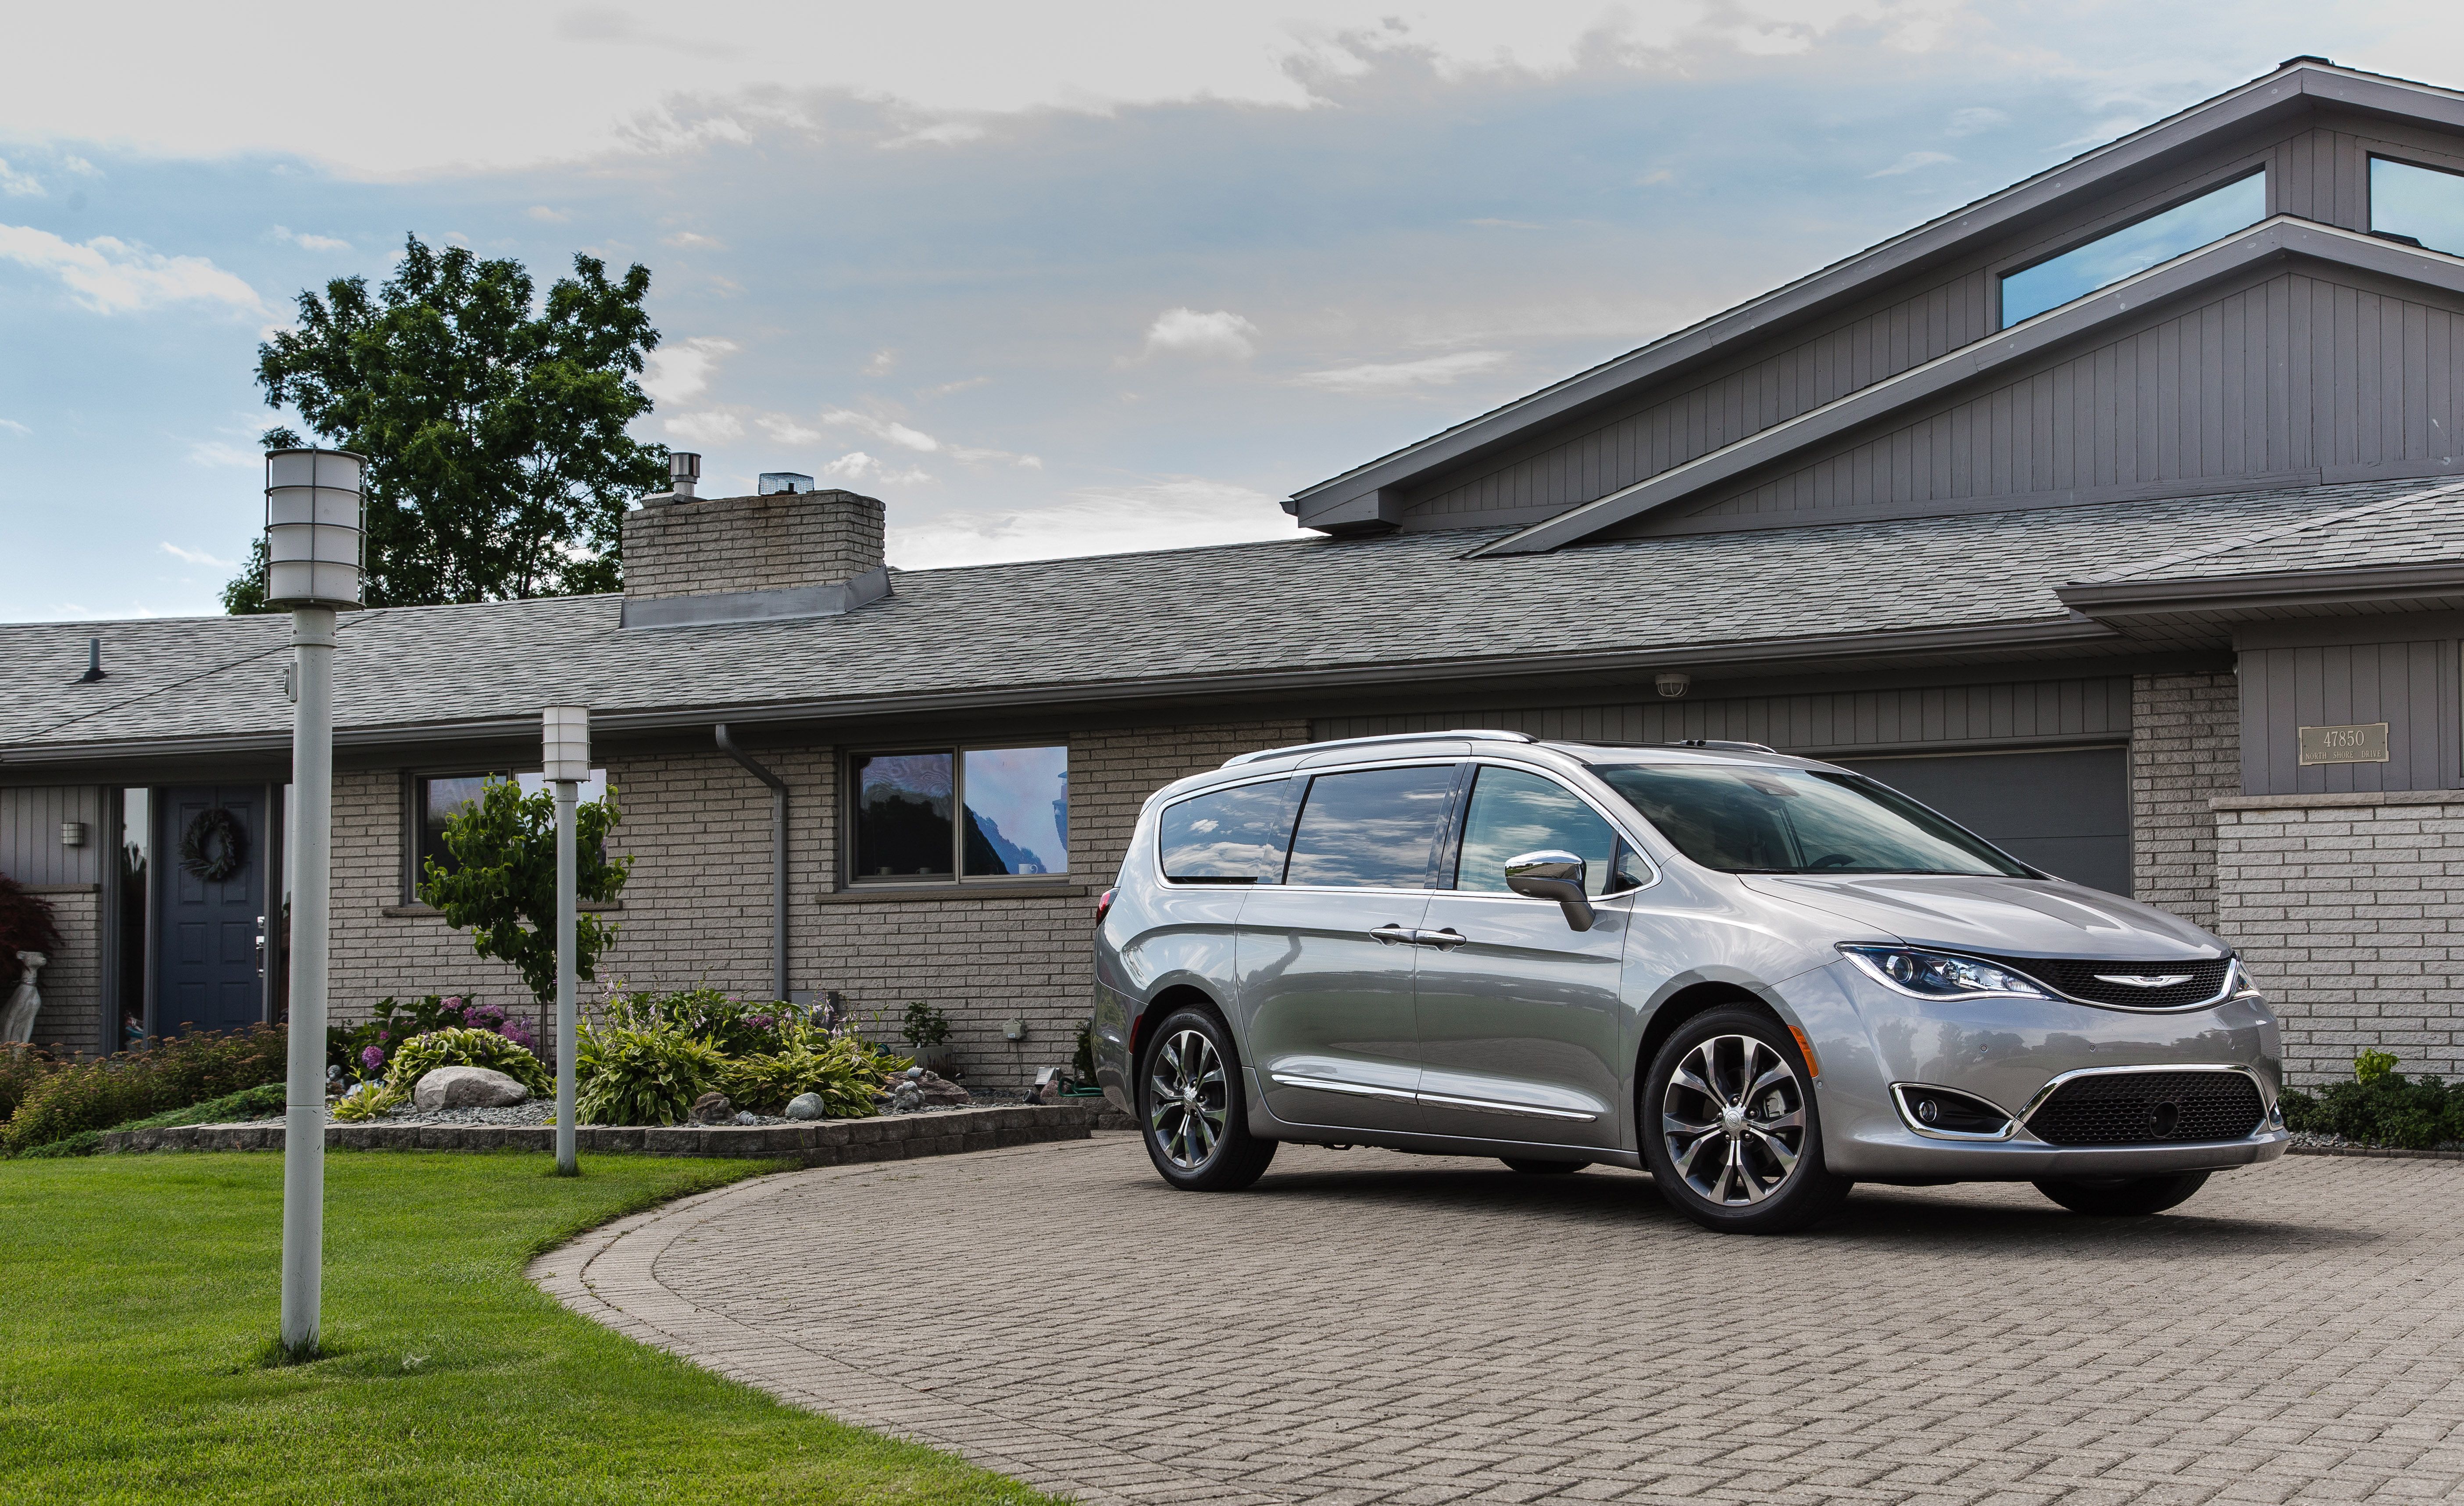 2019 Chrysler Pacifica Review, Pricing 